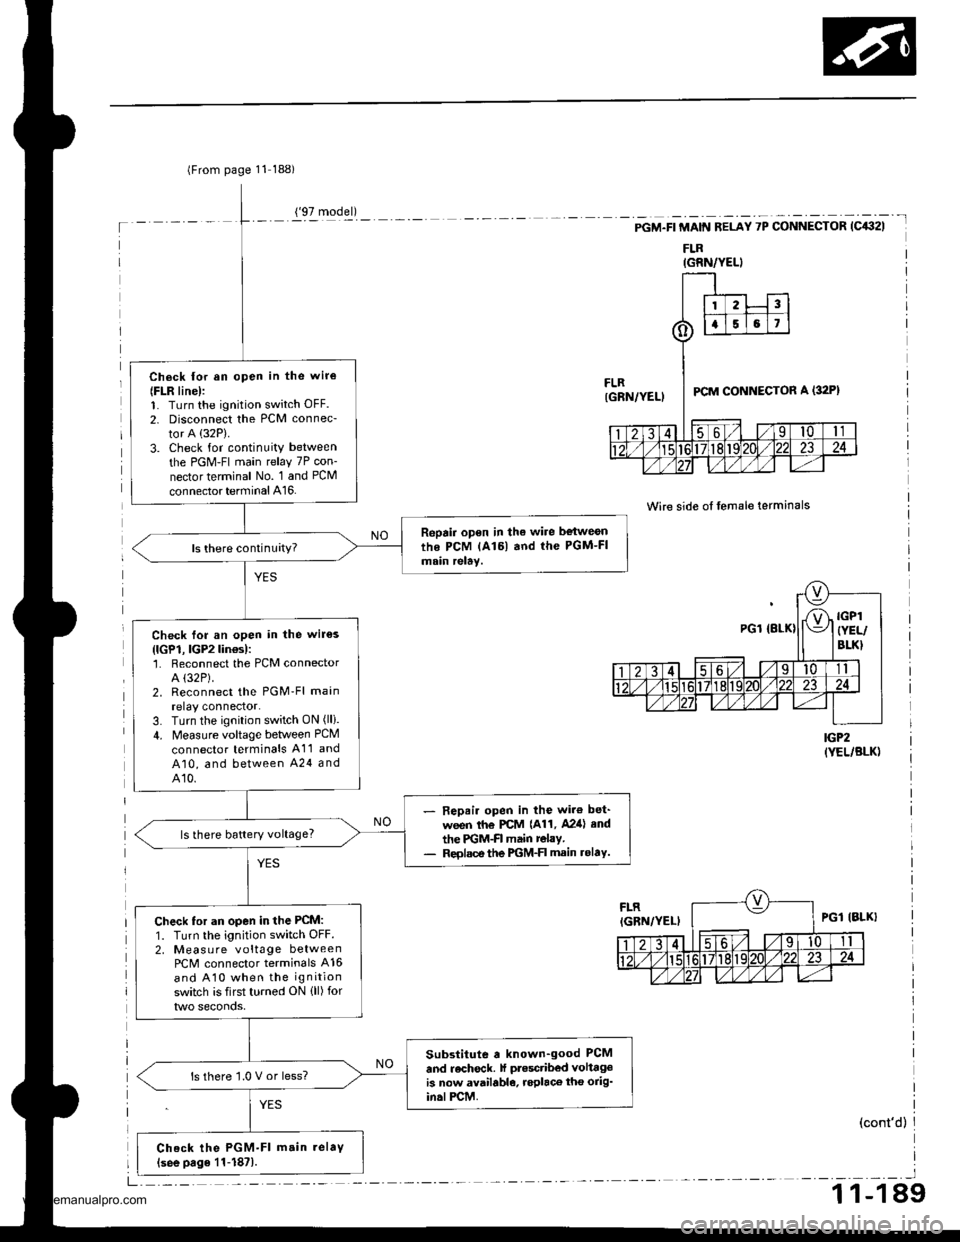 HONDA CR-V 1999 RD1-RD3 / 1.G Workshop Manual 
lFrom page 11 188)
Ch6ck lor an open in the wir€
{FLR line):1. Turn the ignition switch OFF.
2. Disconnect the PCM connec-
tor A (32P).
3. Check for continuity between
the PGM-FI main relay 7P con-